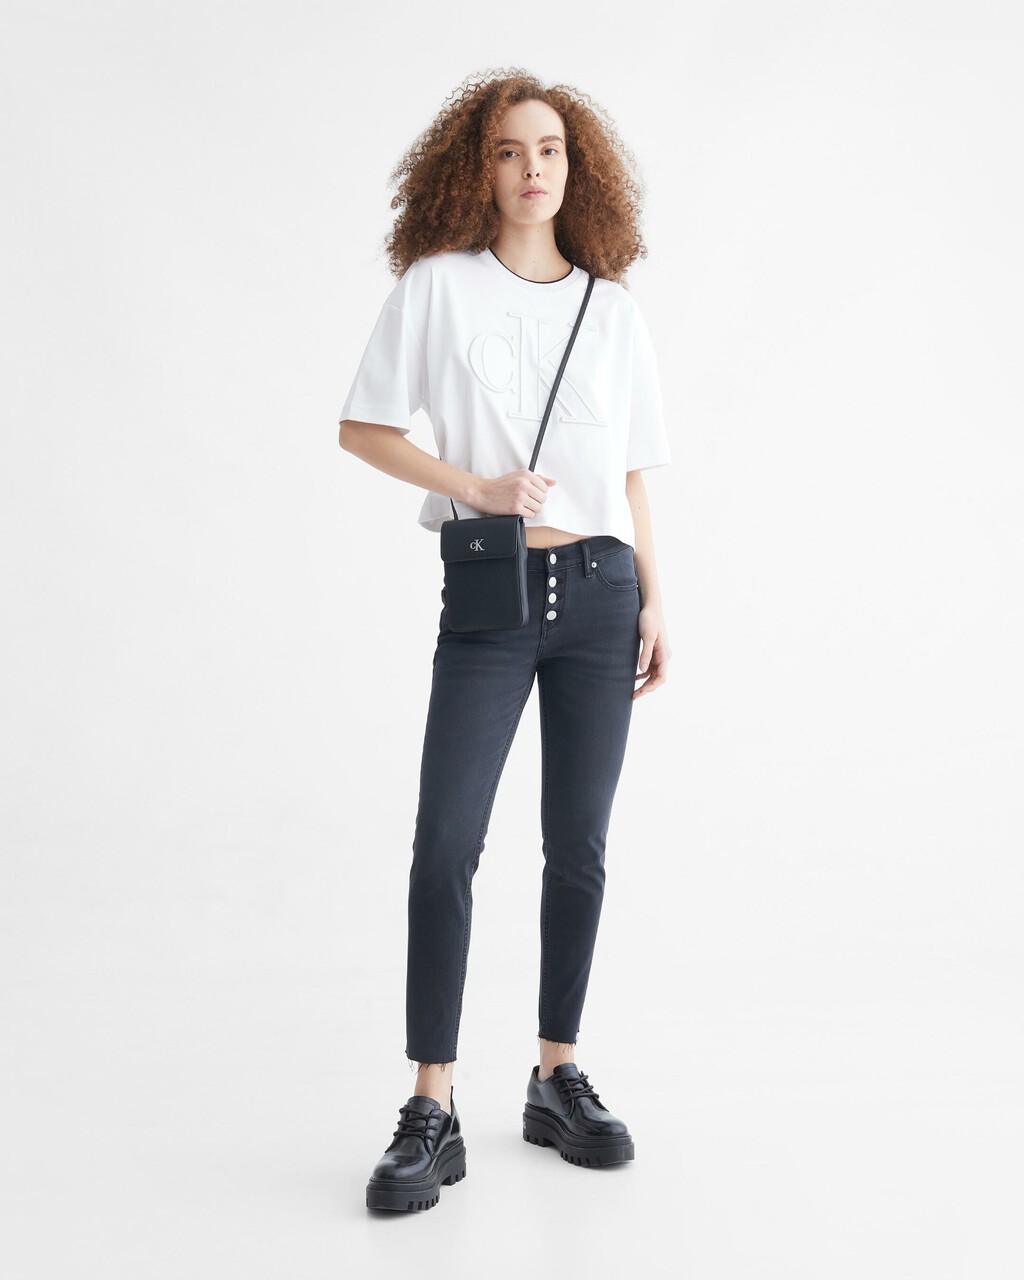 ULTIMATE STRETCH SKINNY CROPPED JEANS, Washed Black Shanks Rwh, hi-res